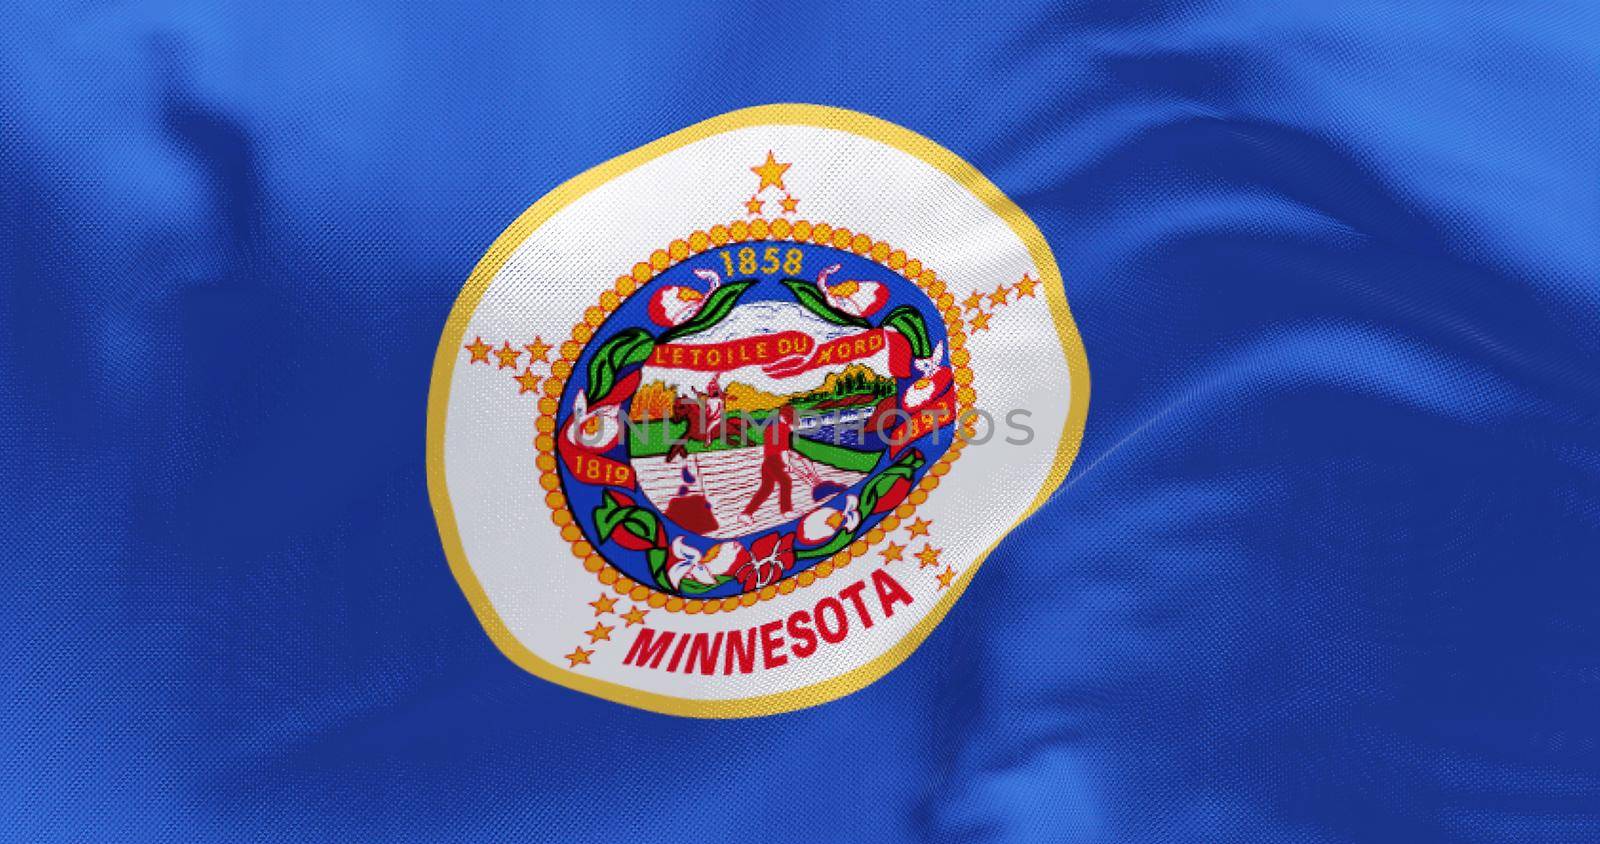 The US state flag of Minnesota waving in the wind by rarrarorro